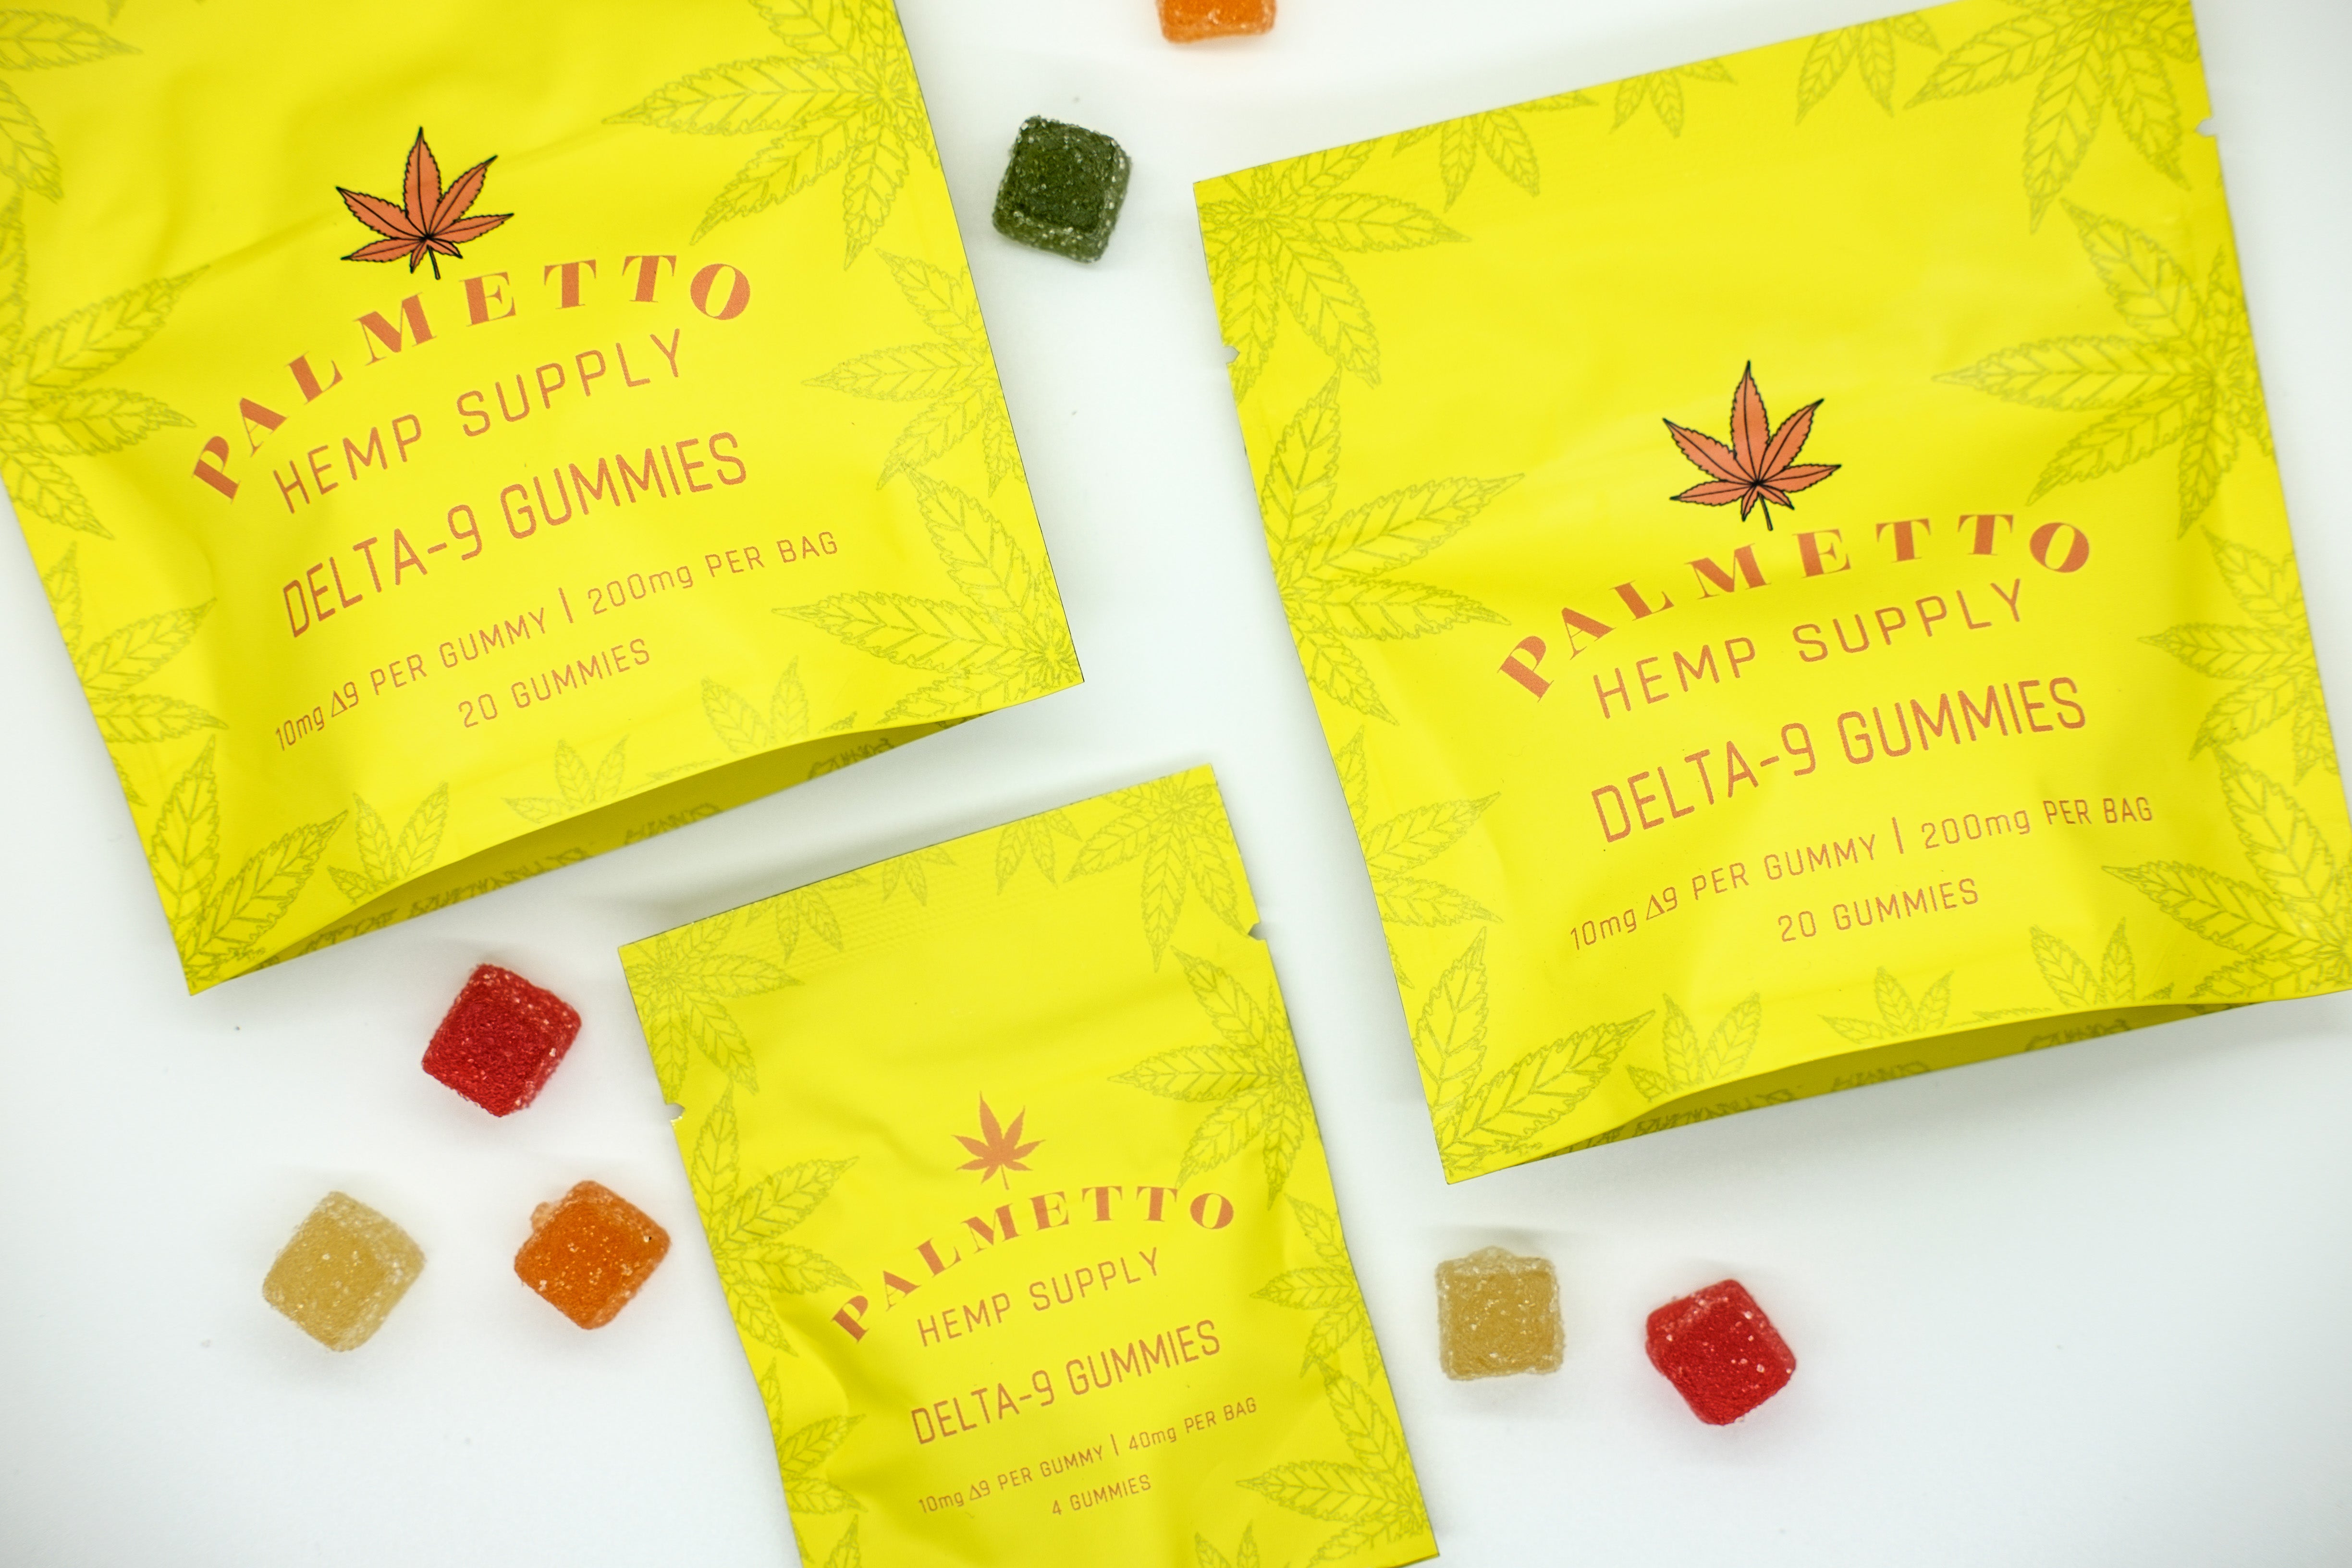 Yellow bags of Palmetto Hemp Supply delta-9 gummies on a white background with various colored gummies in between the bags.